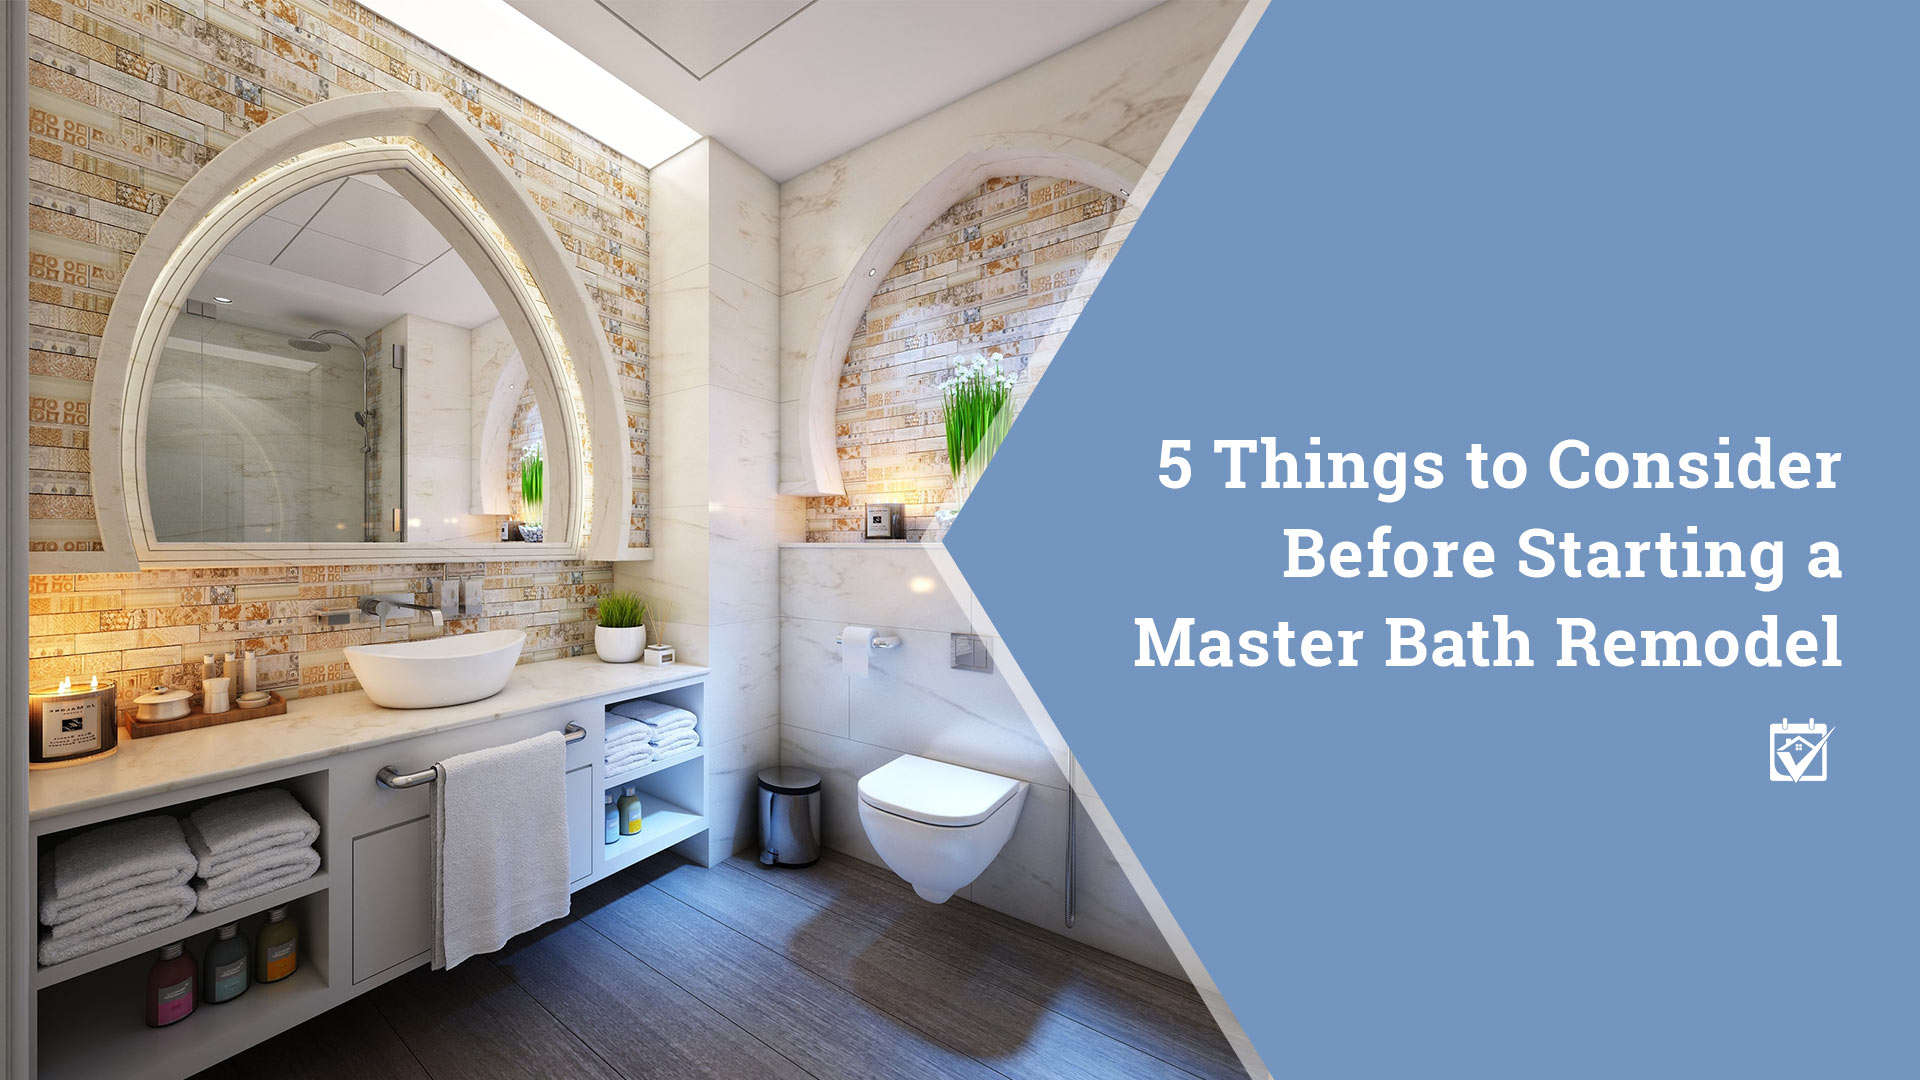 5 Things to Consider Before Starting a Master Bath Remodel